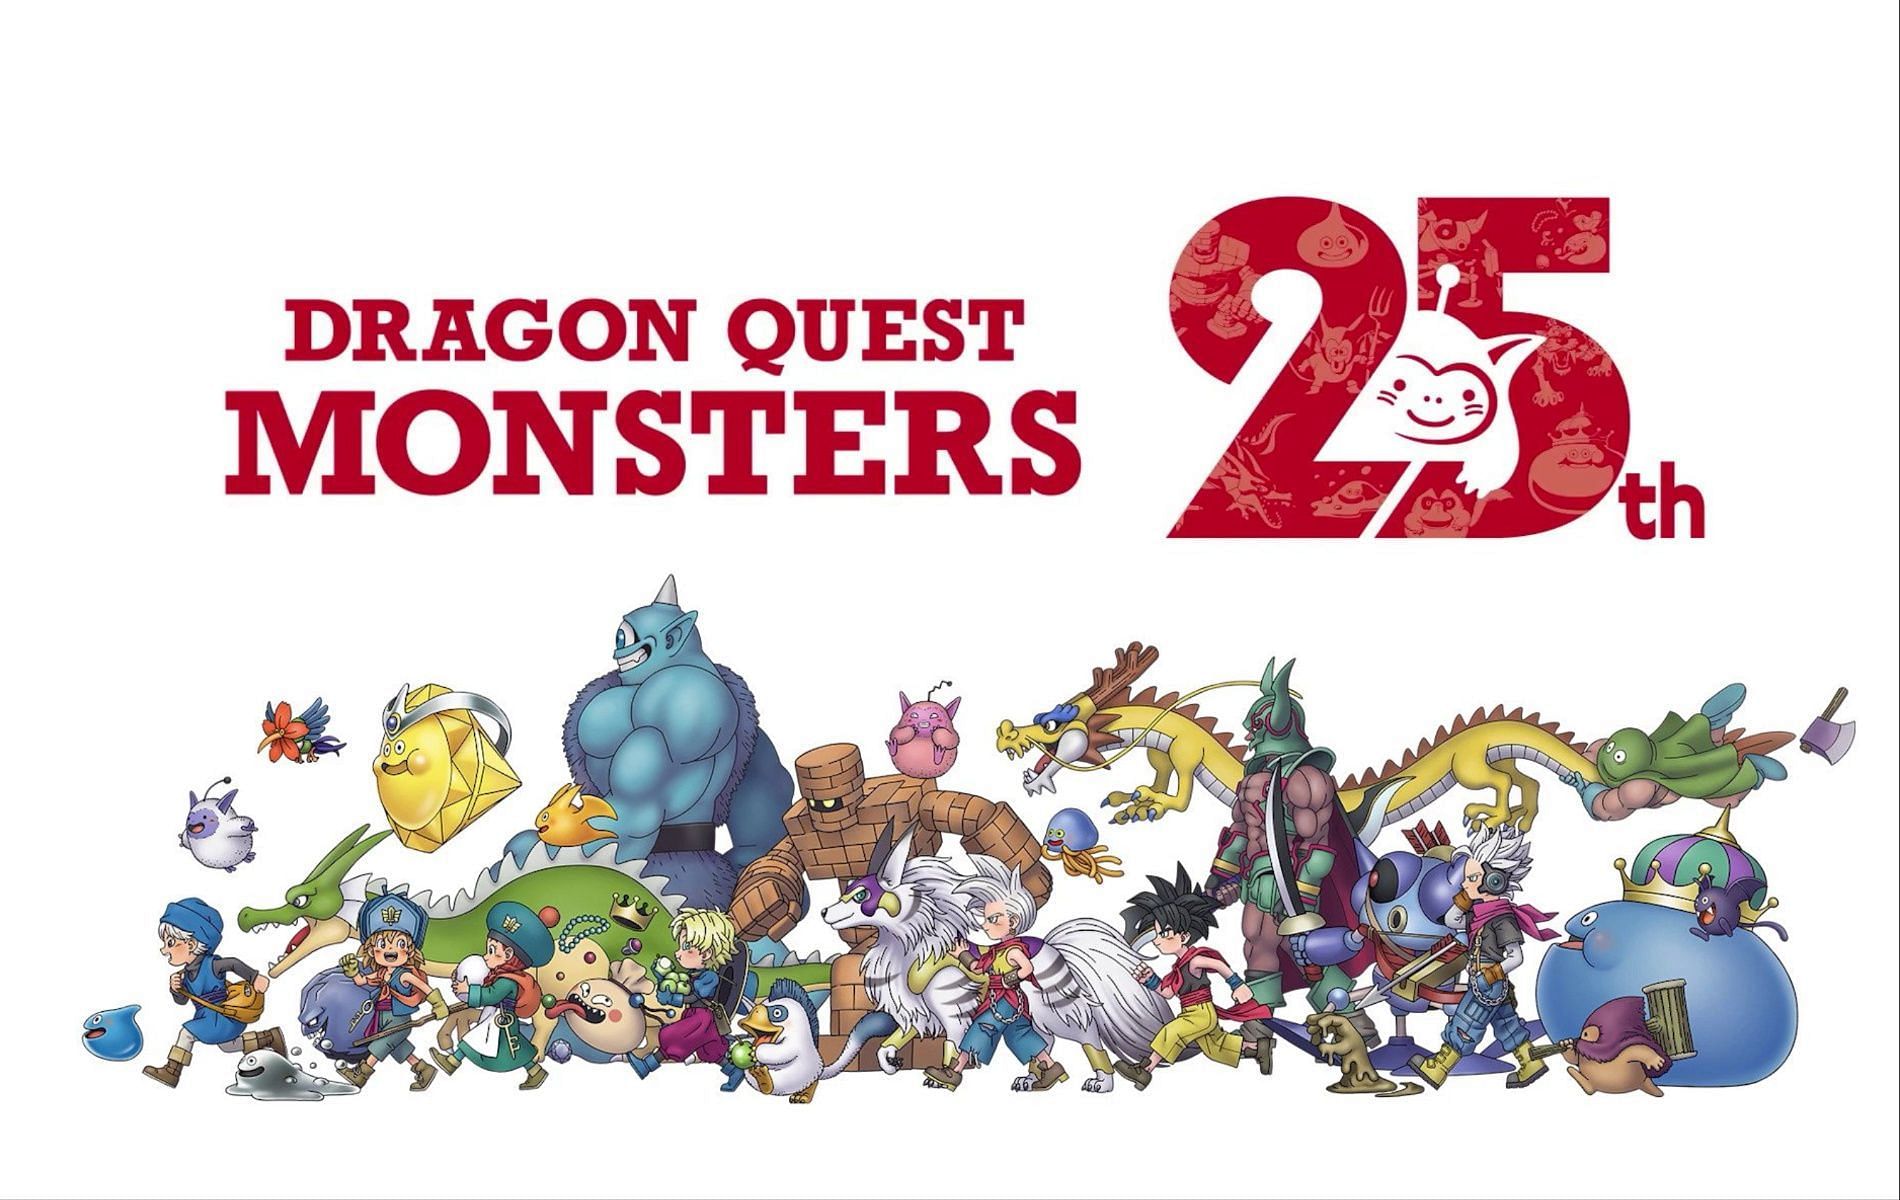 New Dragon Quest Monsters game announced: Platforms, details, and more